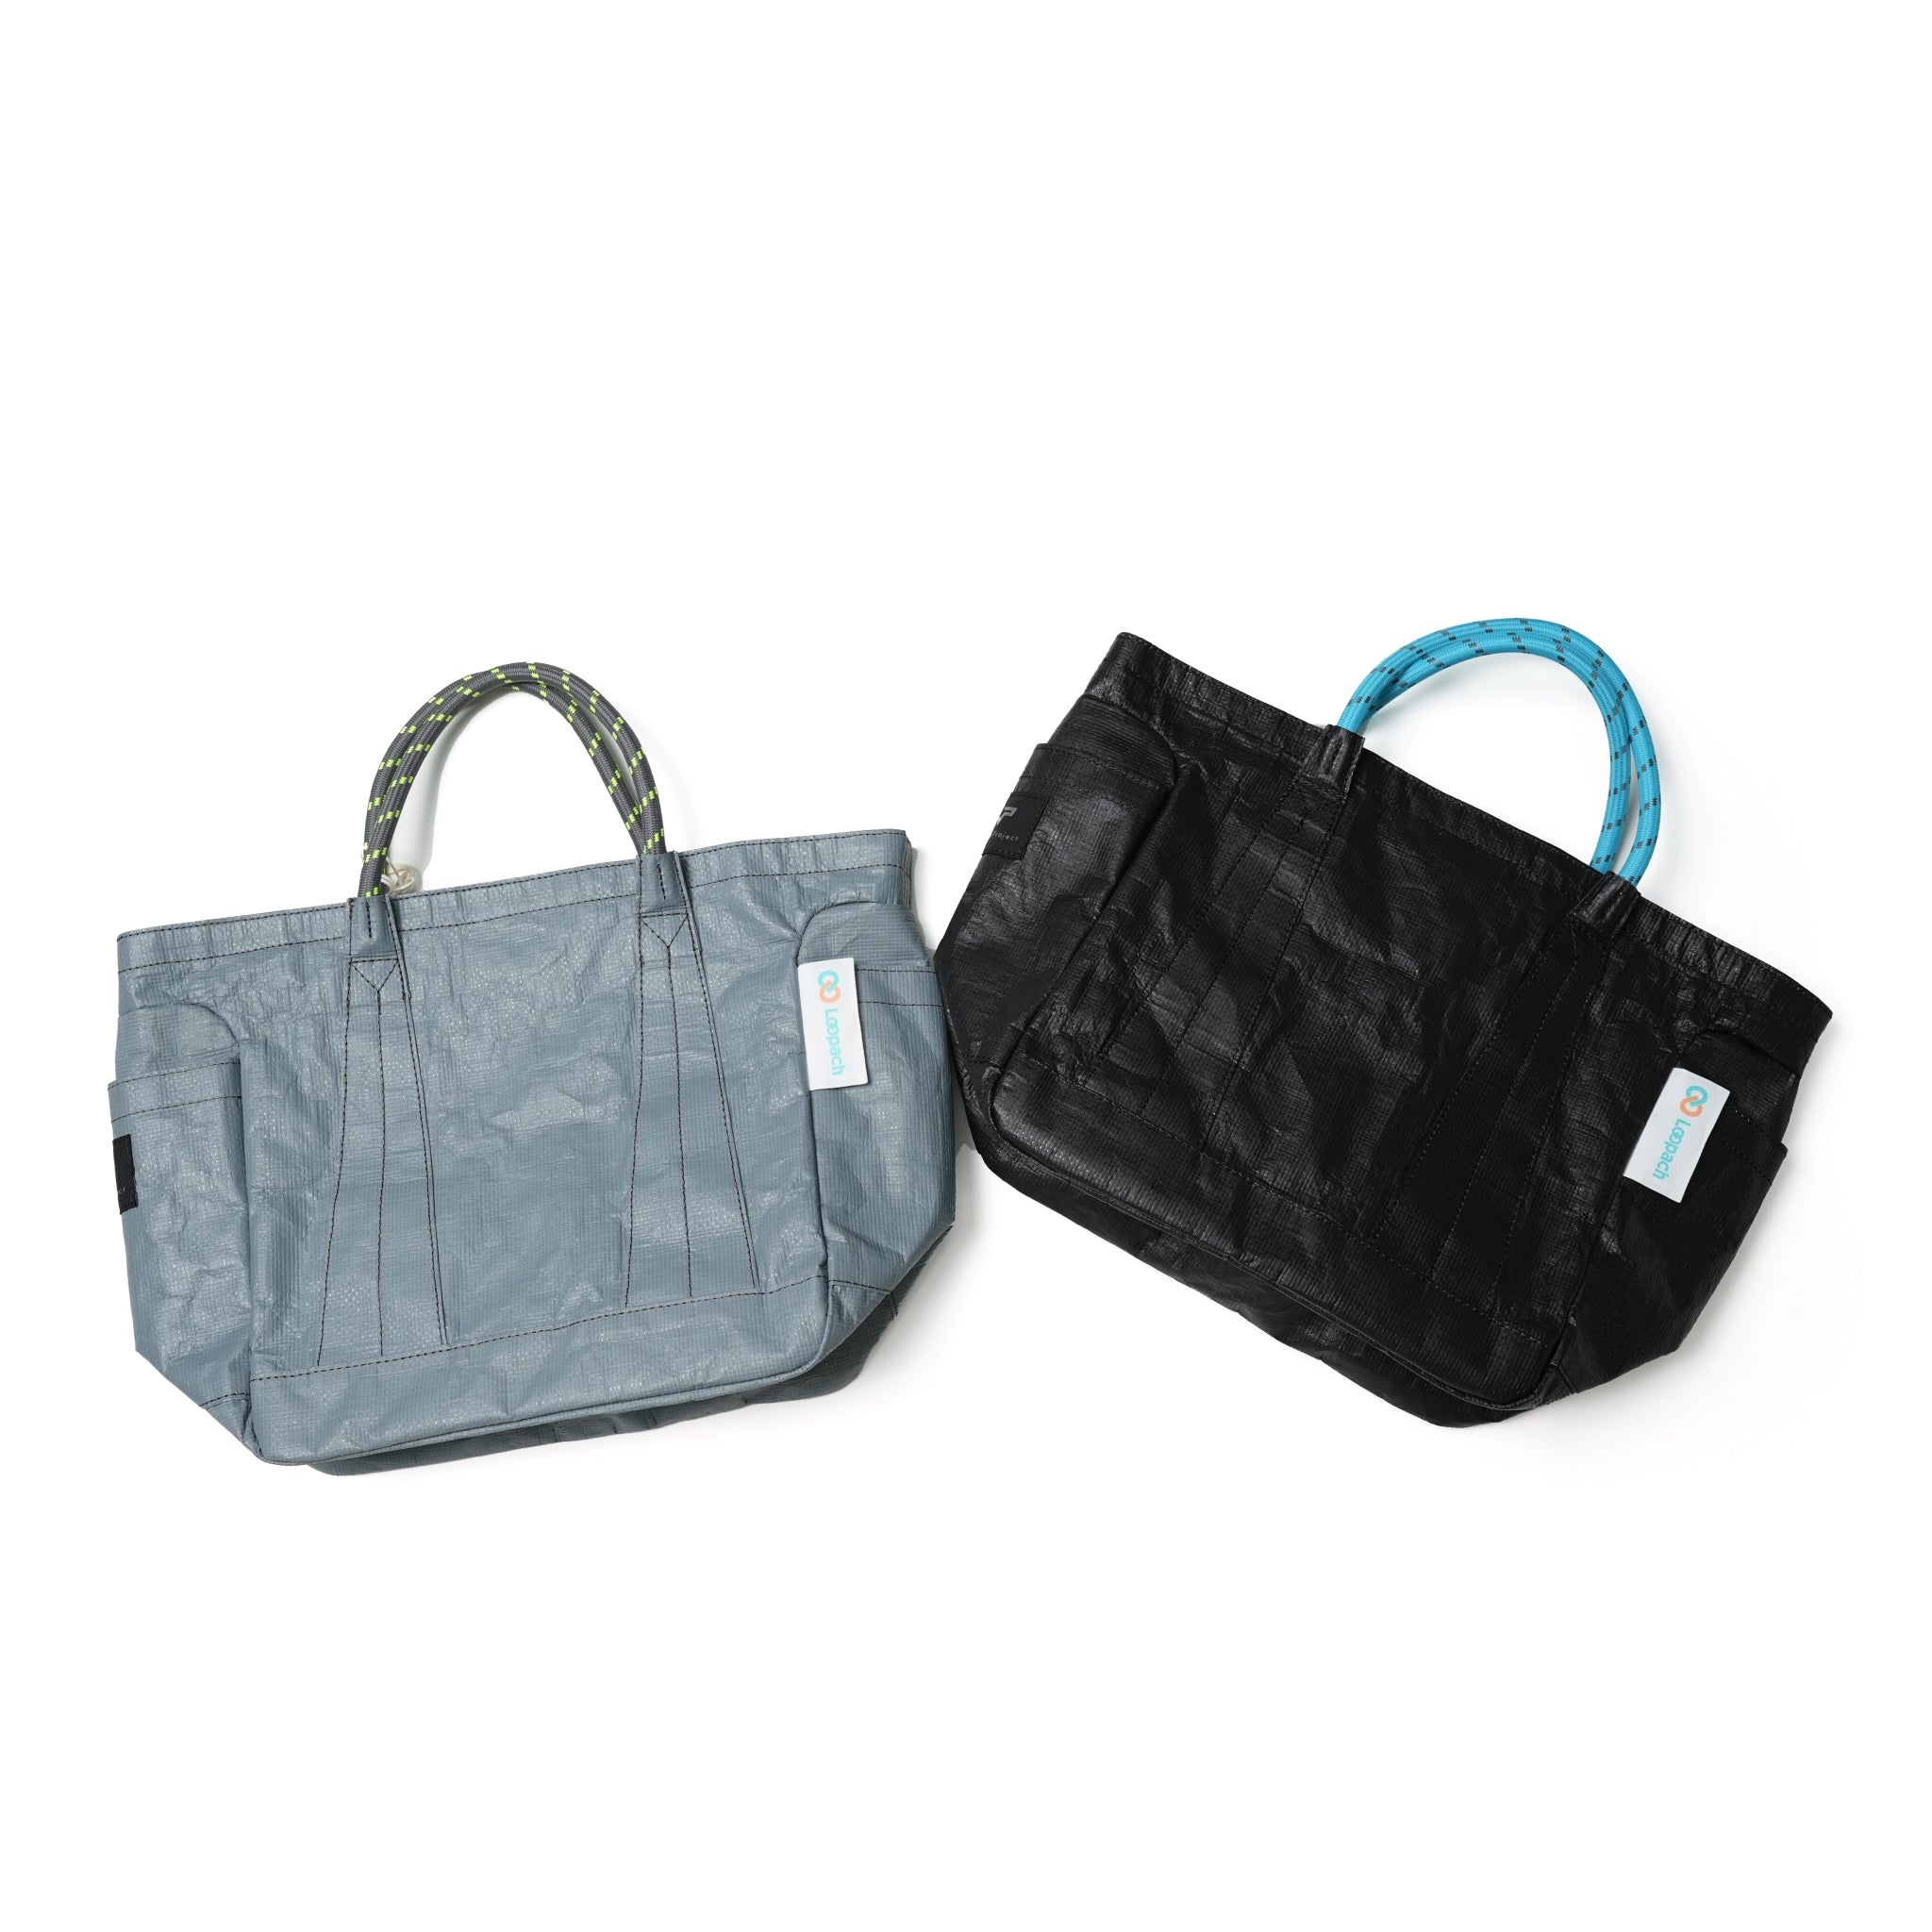 No:NLS231T02 | Name:ReTA BASE×New Life Project TOTE/S | Color:GRY×YEL GRAY OR BLACK/TQS×GRY【New Life Project_ニューライフプロジェクト】